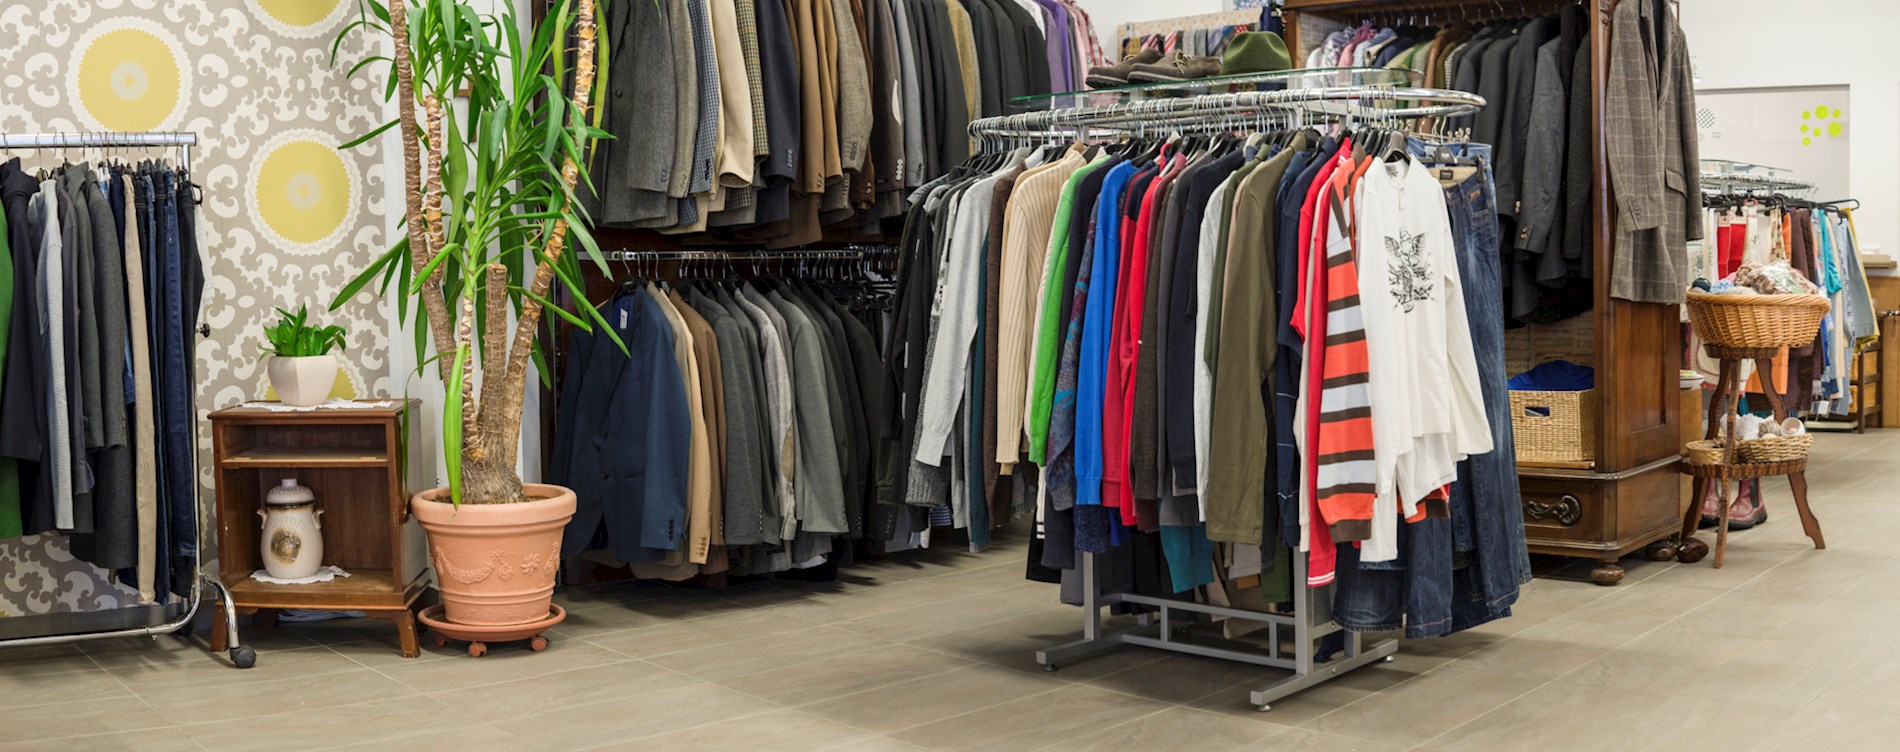 You can see several racks of trendy clothes in a Carla shop.